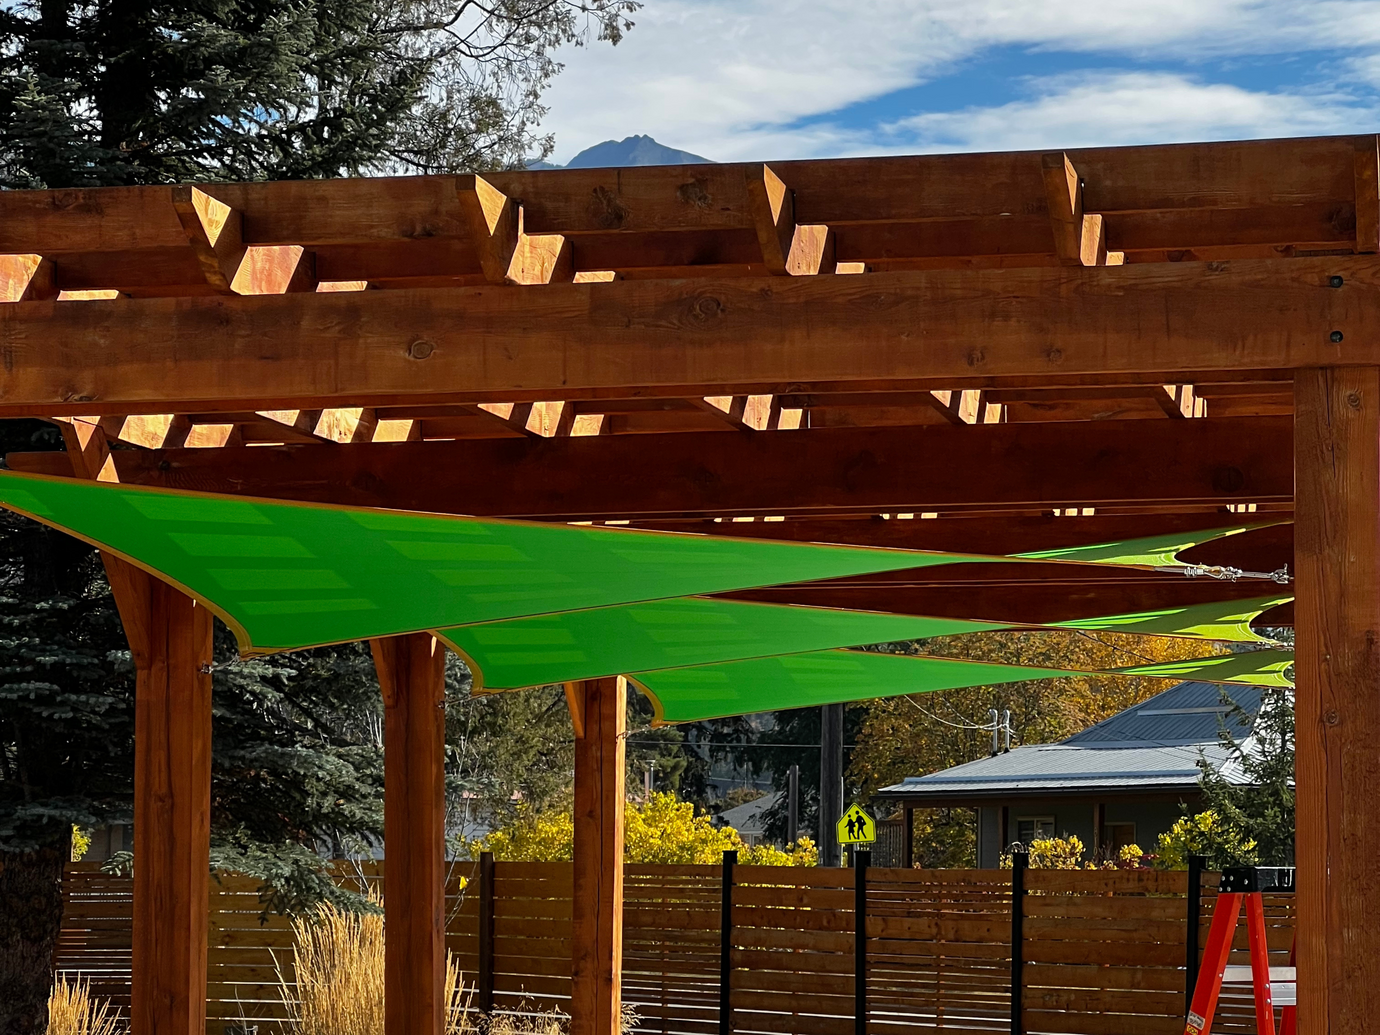  A wooden pergola with green hanging shade sails installed, creating a shaded area beneath. The background includes a clear sky and tall trees, highlighting an outdoor, nature-inspired setting.